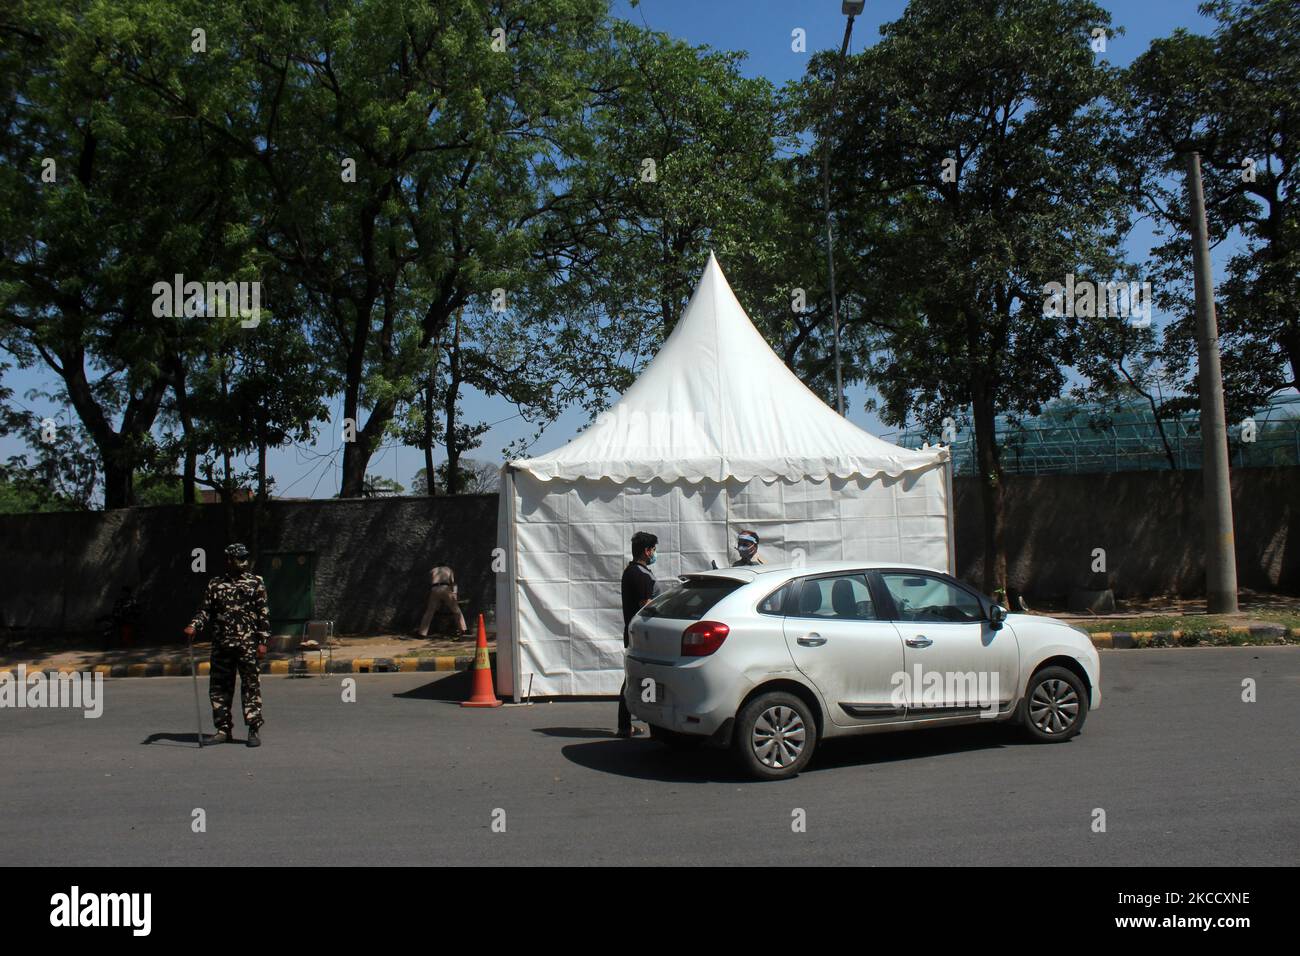 Delhi Police officers stop vehicles at a check point during a weekend lockdown in New Delhi, India on April 17, 2021. India on Saturday reported 2,34,692 new Covid-19 cases and 1,341 deaths in the last 24 hours, according to data from the Union Health Ministry. (Photo by Mayank Makhija/NurPhoto) Stock Photo